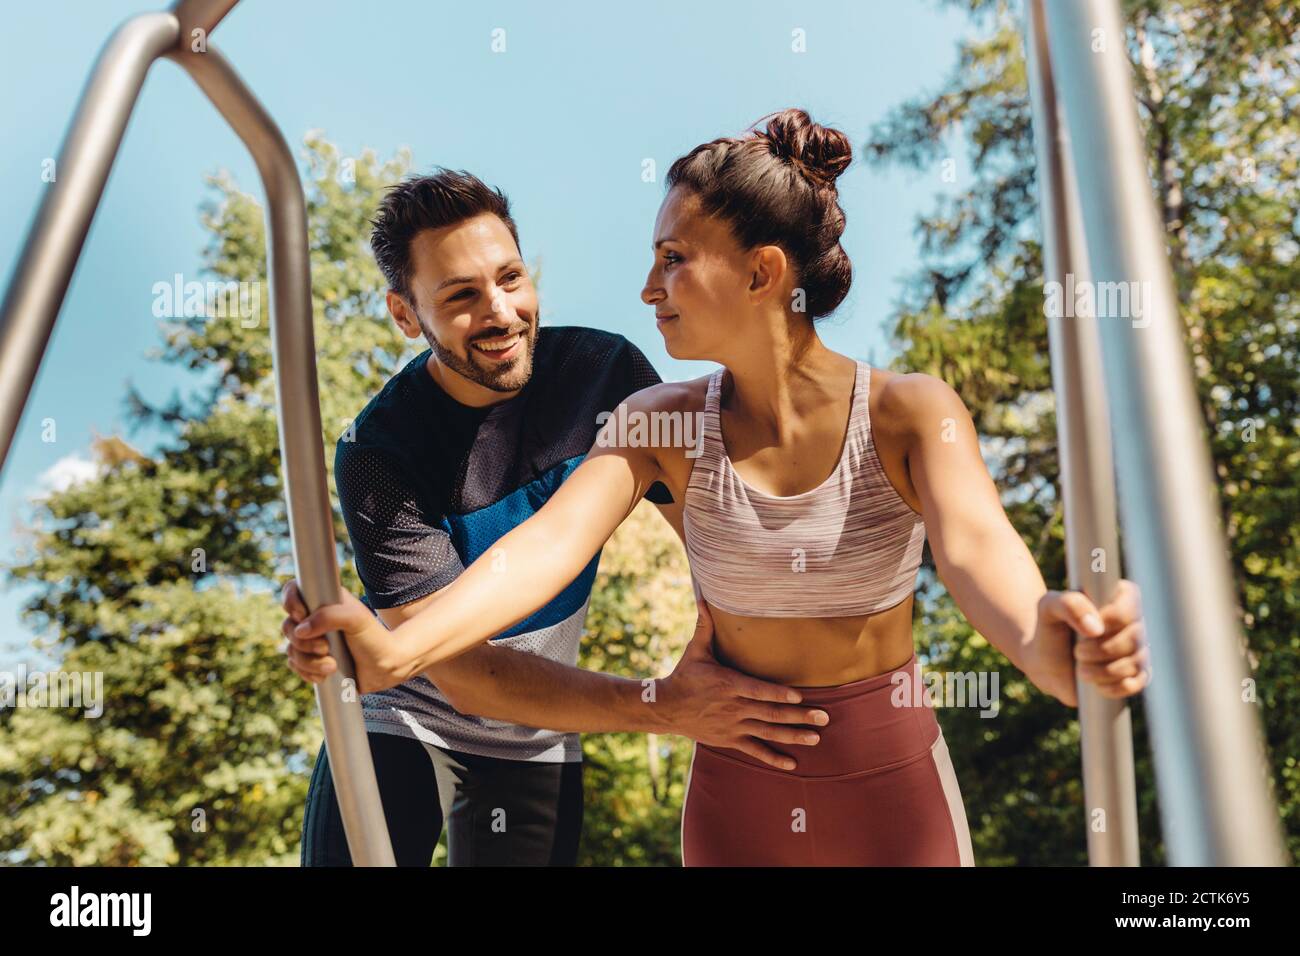 Man supporting woman doing press-ups on a fitness trail Stock Photo